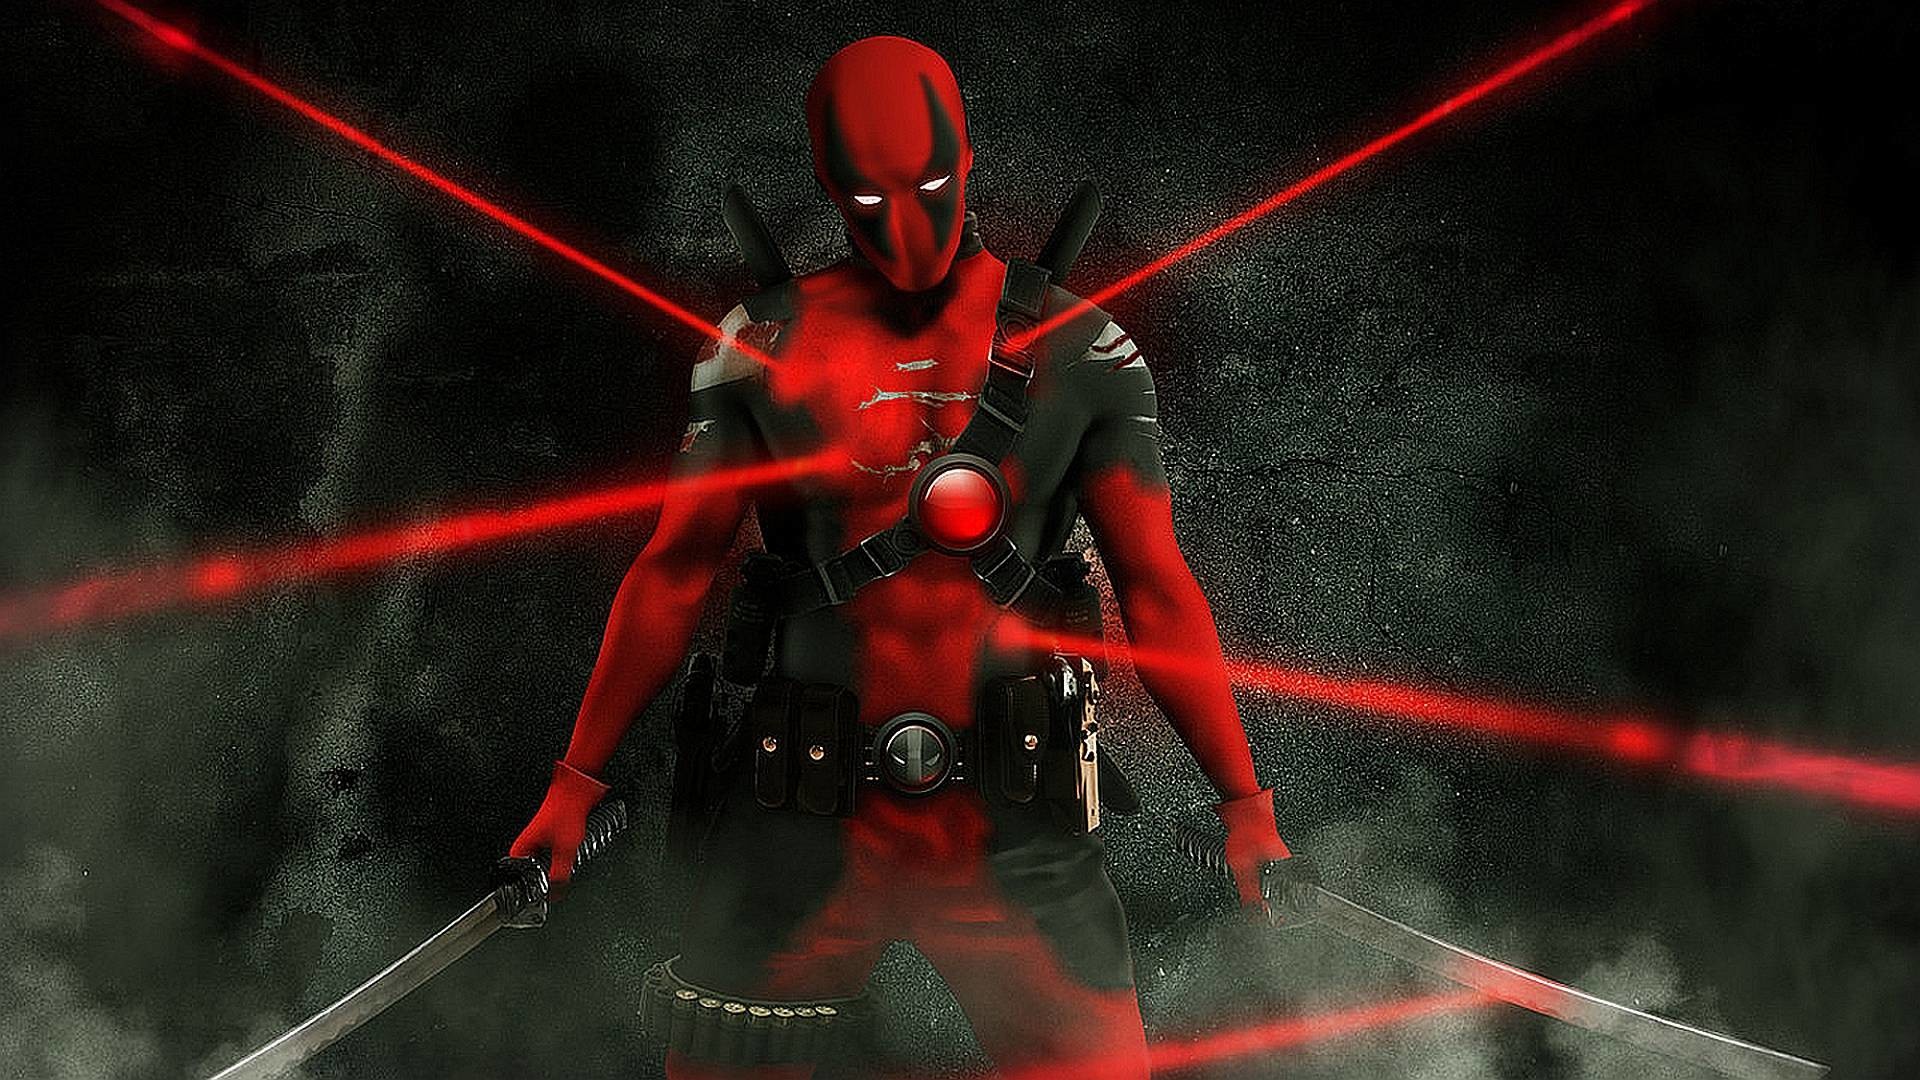 1920x1080 Movie : Wallpapers For Deadpool Movie Wallpaper 1080x1920px .